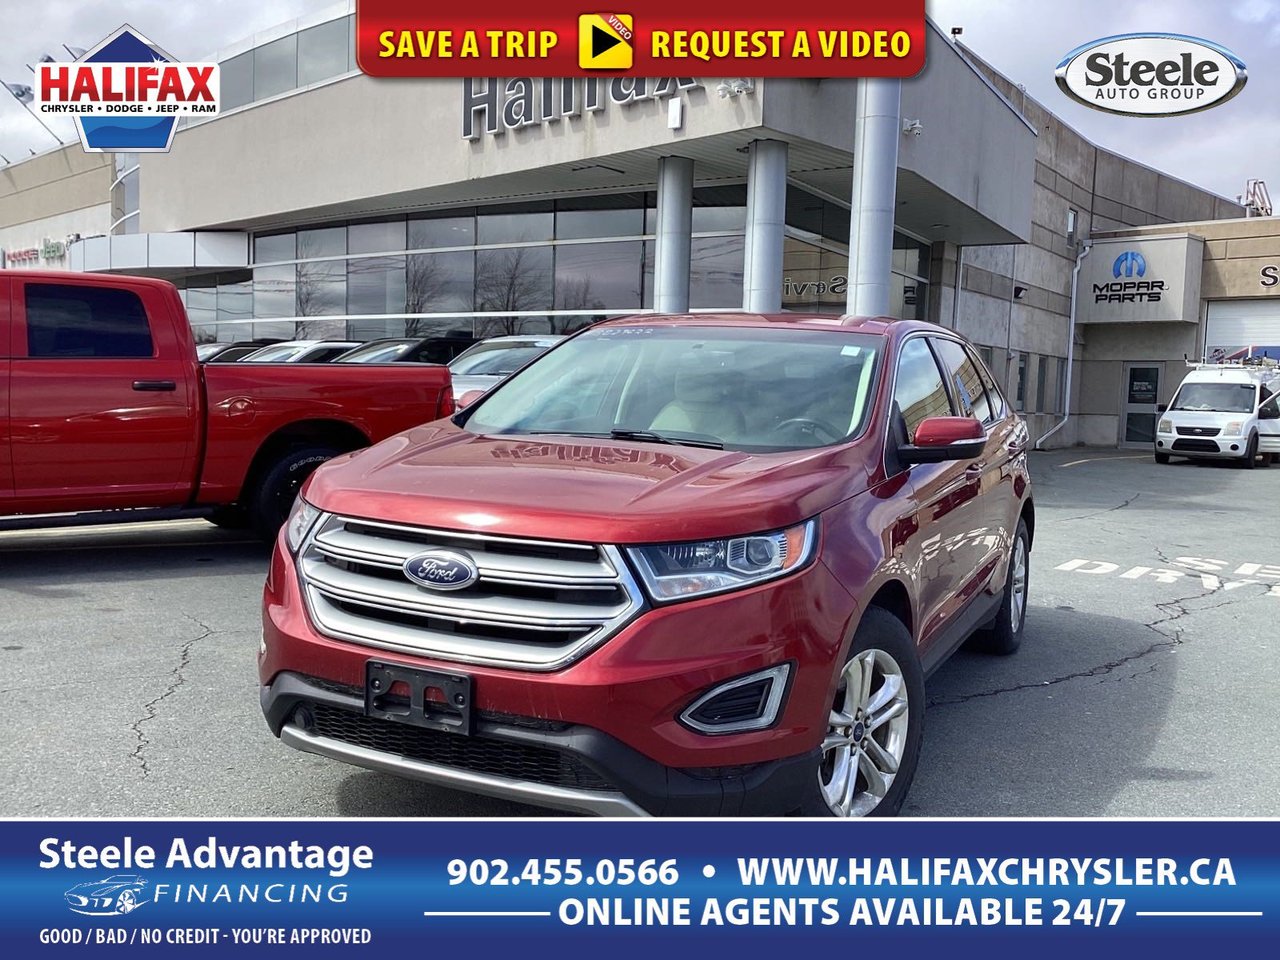 2015 Ford Edge SEL - AWD, LOW KM, HEATED SEATS, BACK UP CAMERA, POWER LIFT GATE-0